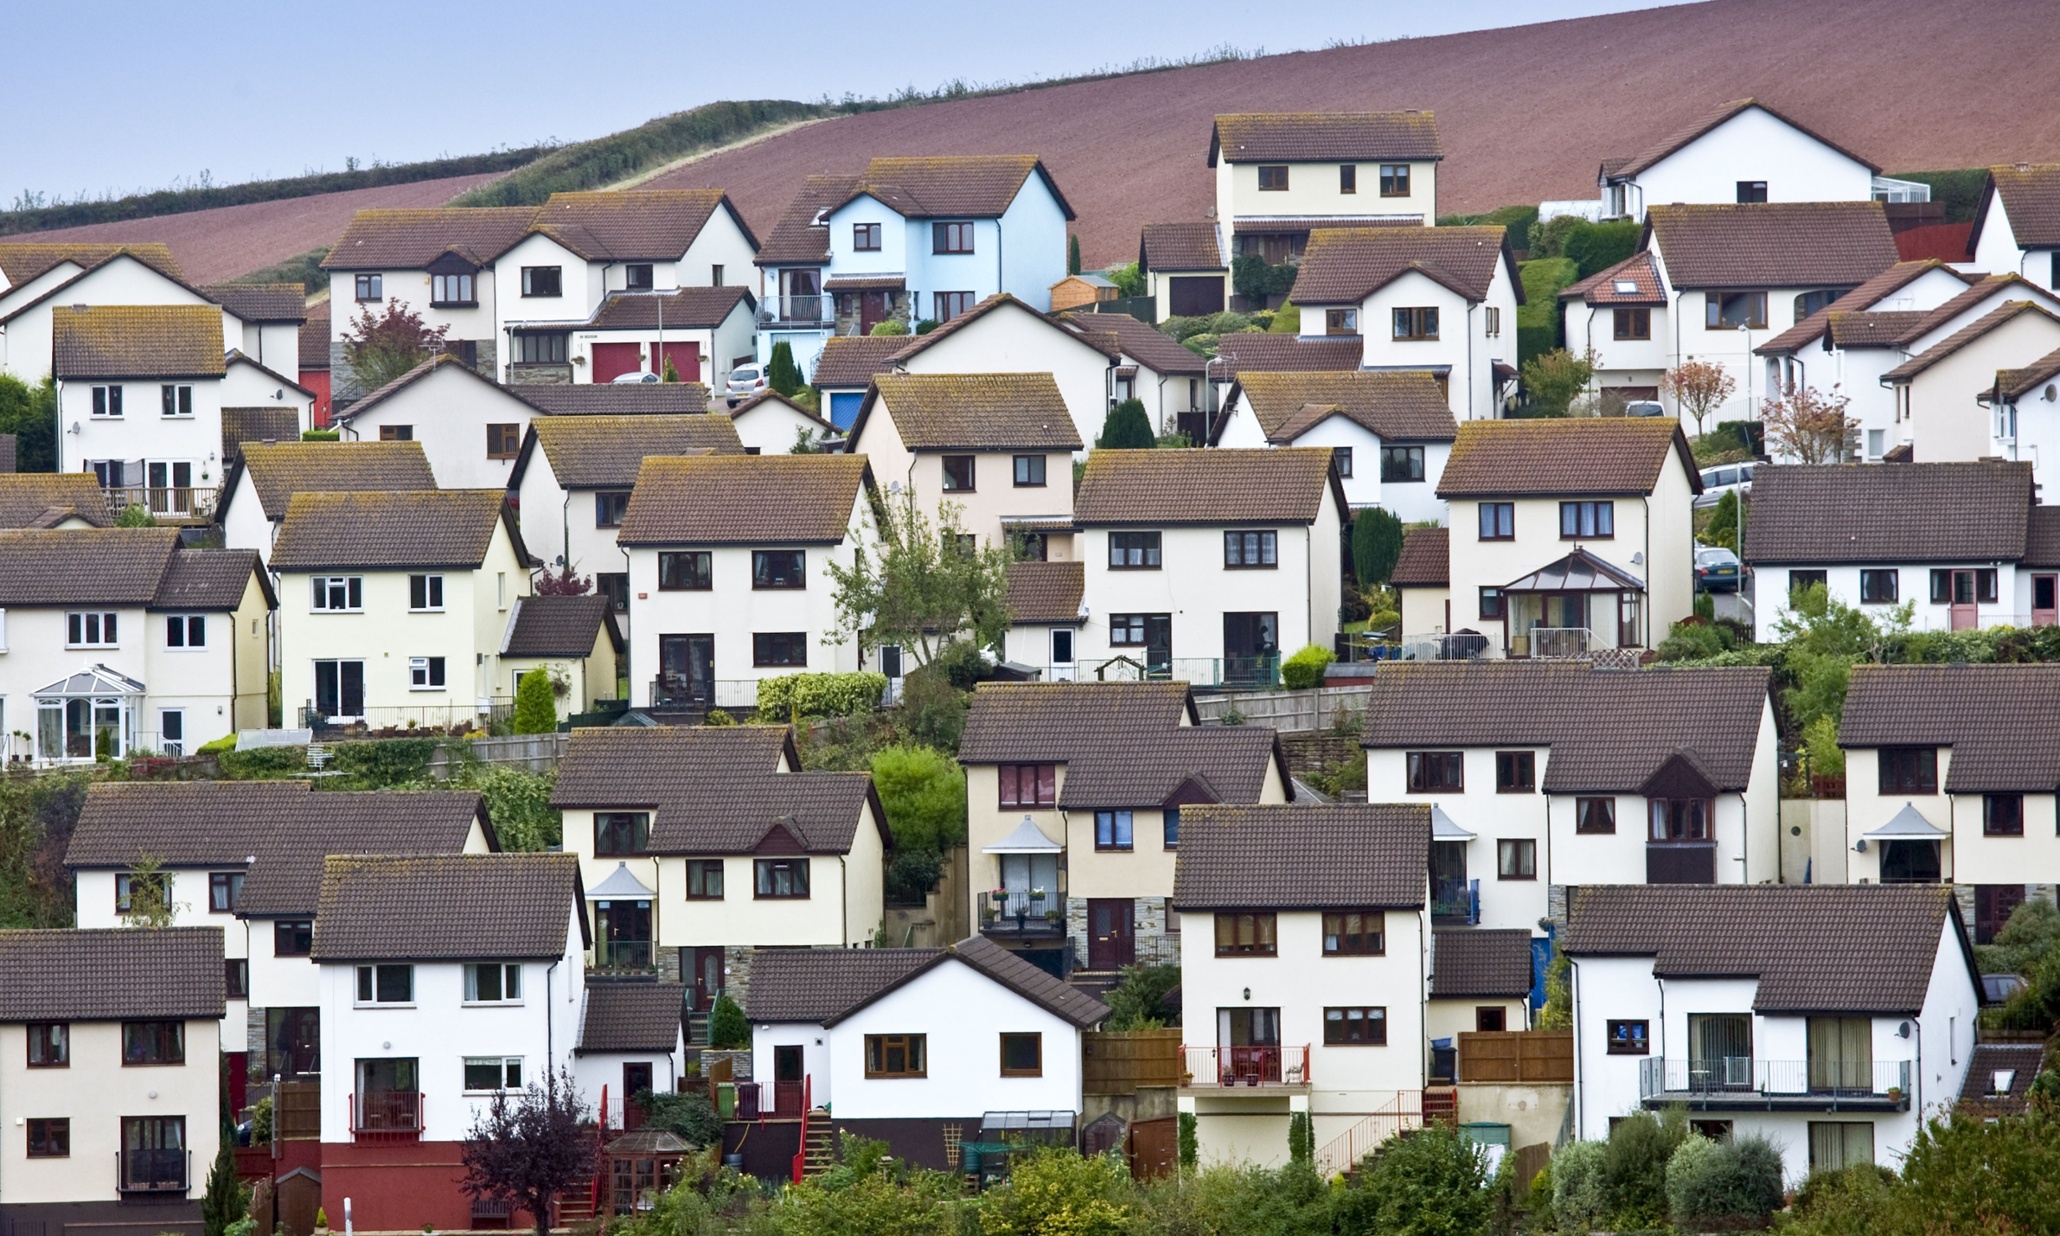 Kinds of housing. Terraced House in Britain. Houses in the uk. Types of Houses in the uk. Flats Houses in Britain.